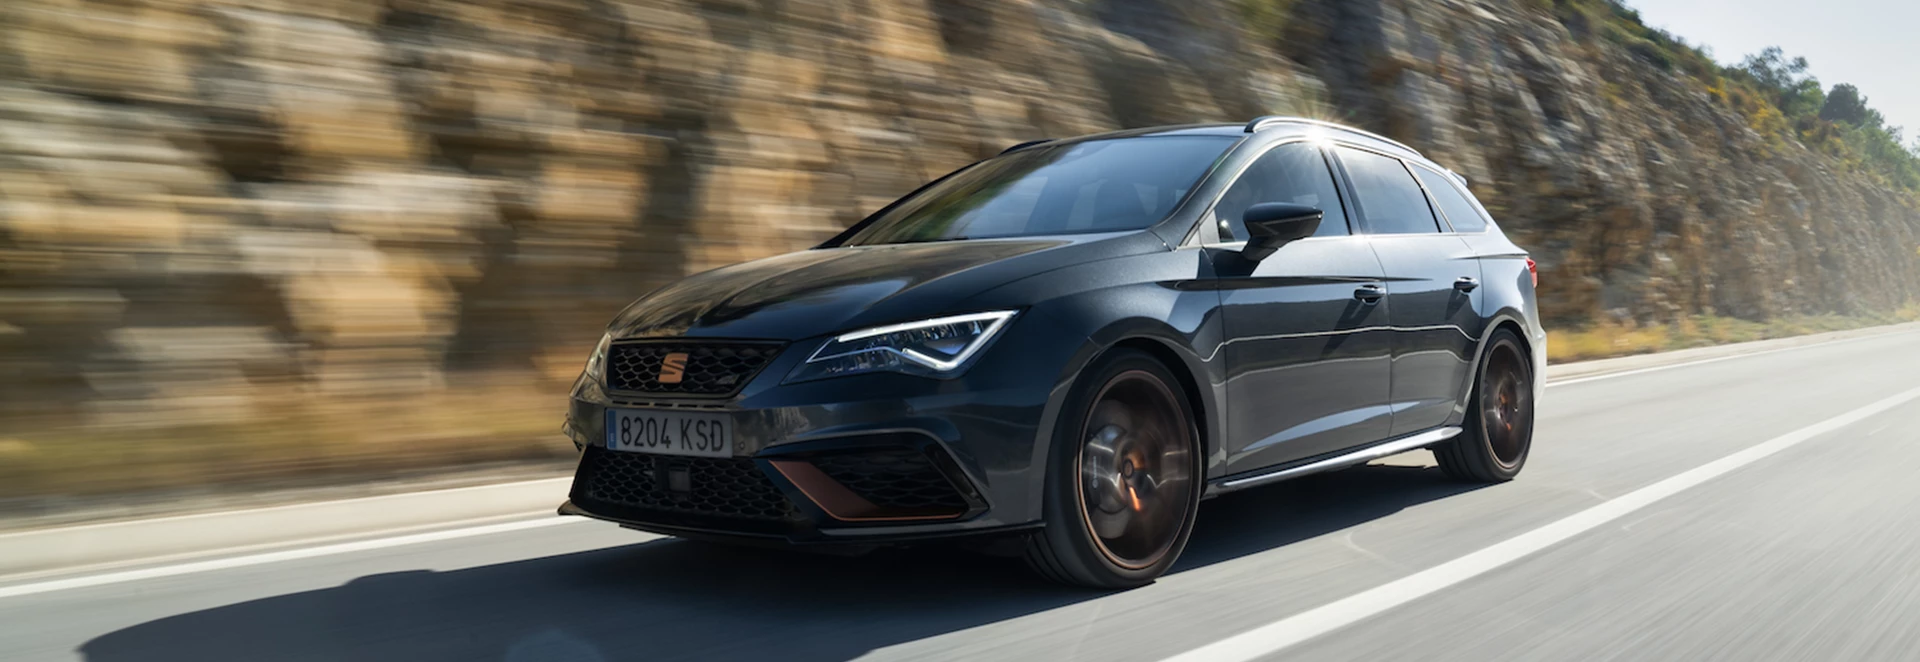 SEAT Leon Cupra R ST special edition revealed